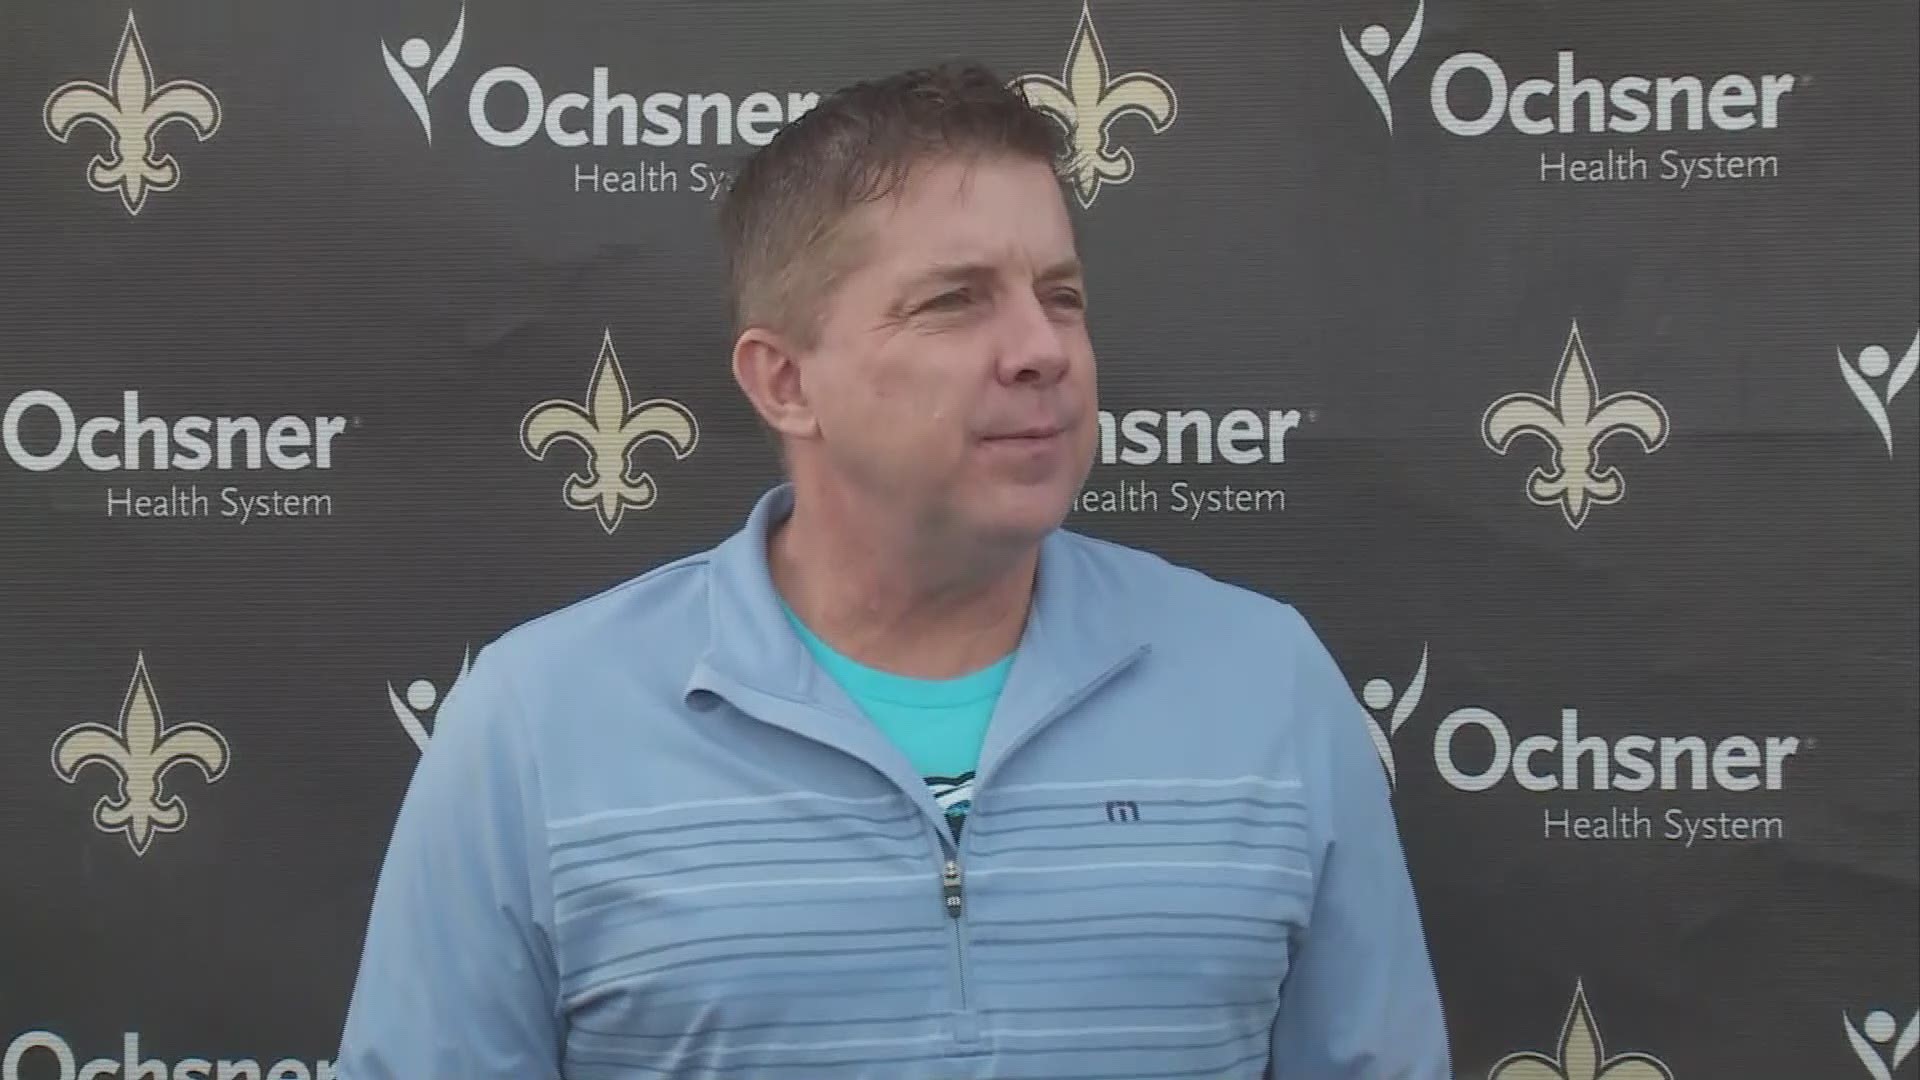 Saints head coach Sean Payton reflected on the season-ending loss in the NFC Championship, saying he handled it by holing up in his room and eating ice cream and watching Netflix.